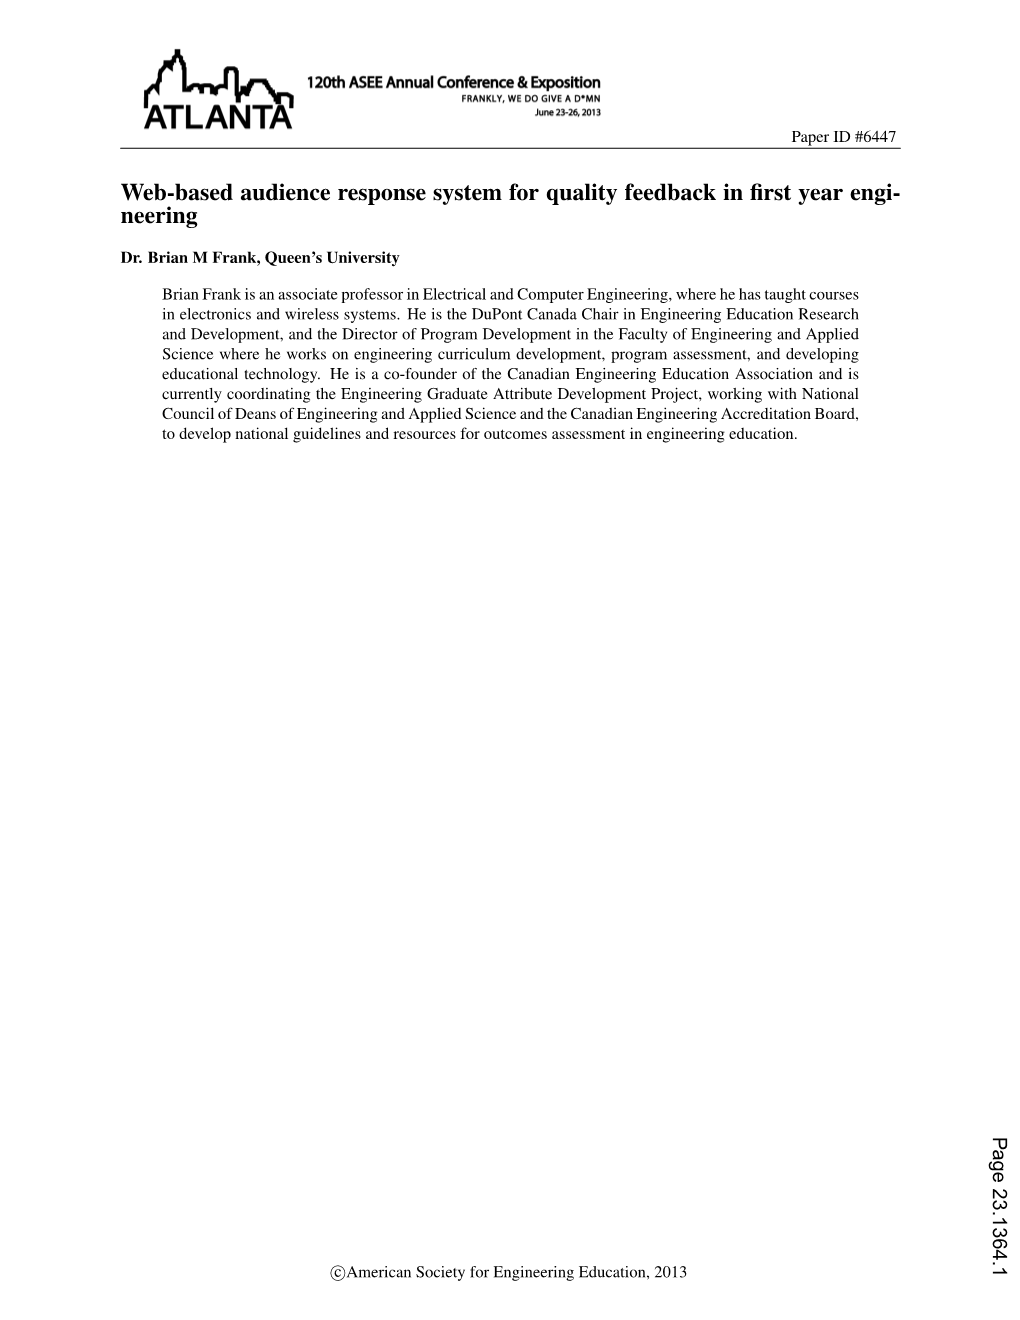 Web-Based Audience Response System for Quality Feedback in First Year Engineering